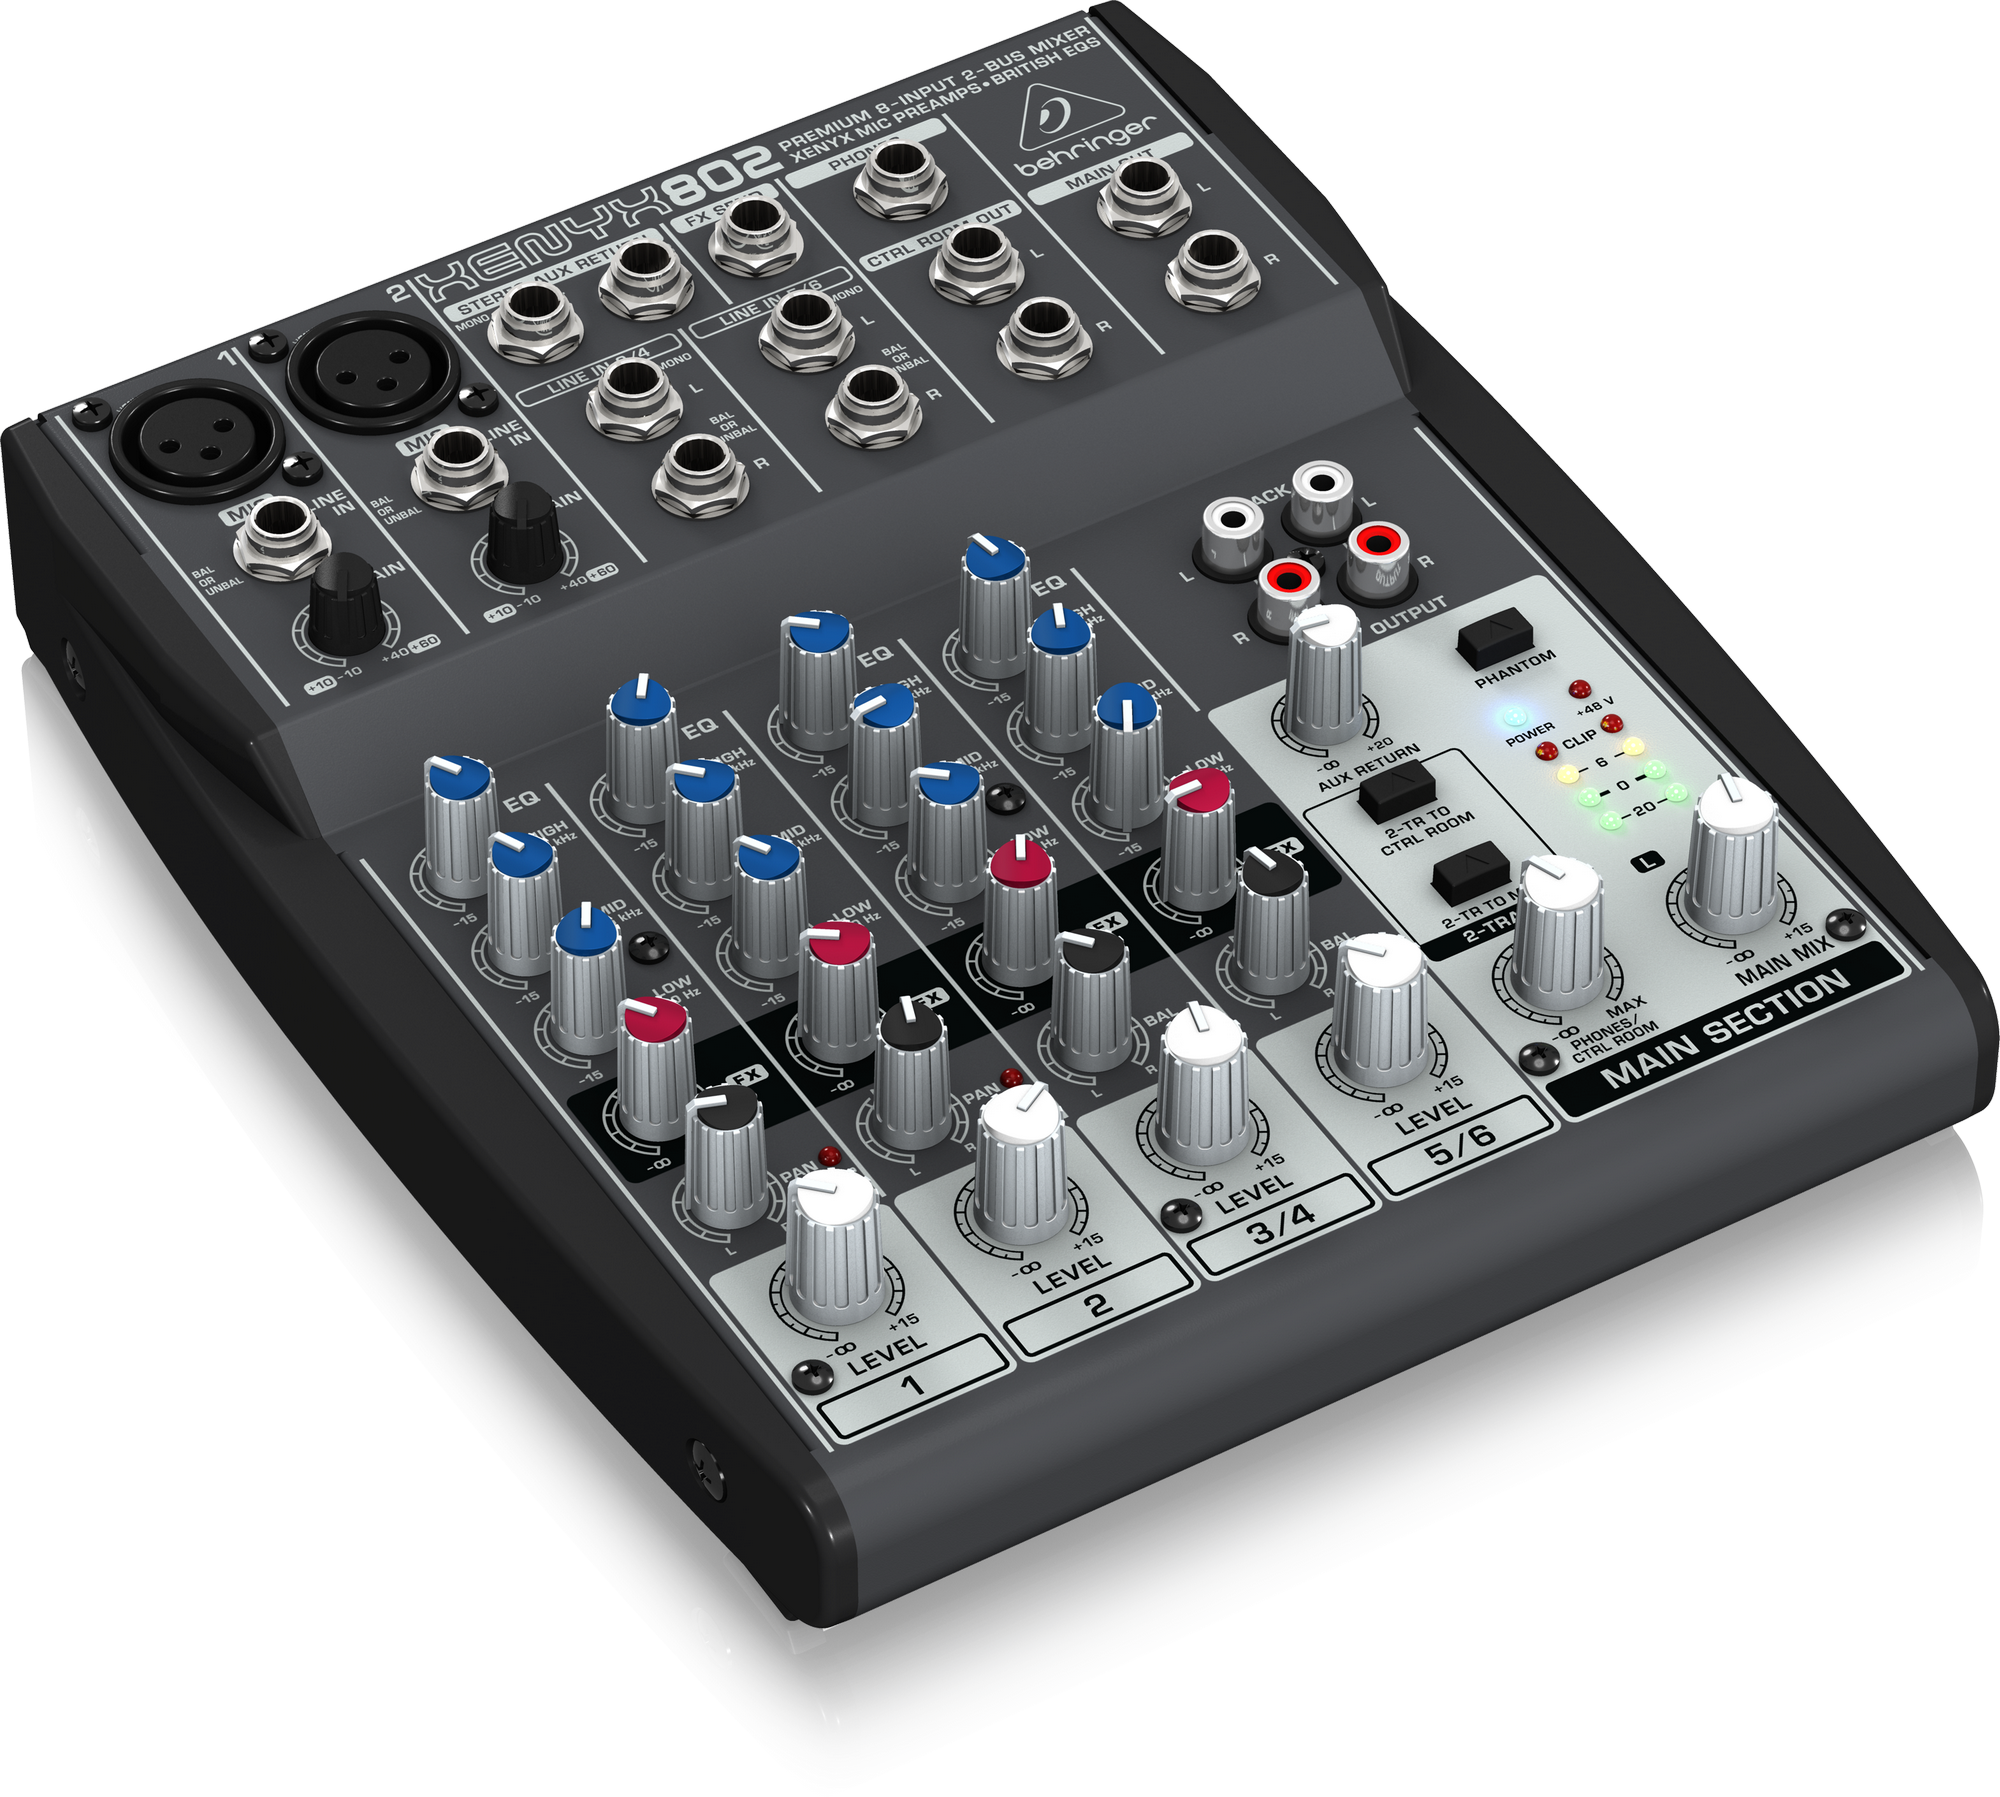 502 & More Customizable Storage USA Gear Audio DJ Mixer for Behringer 802 